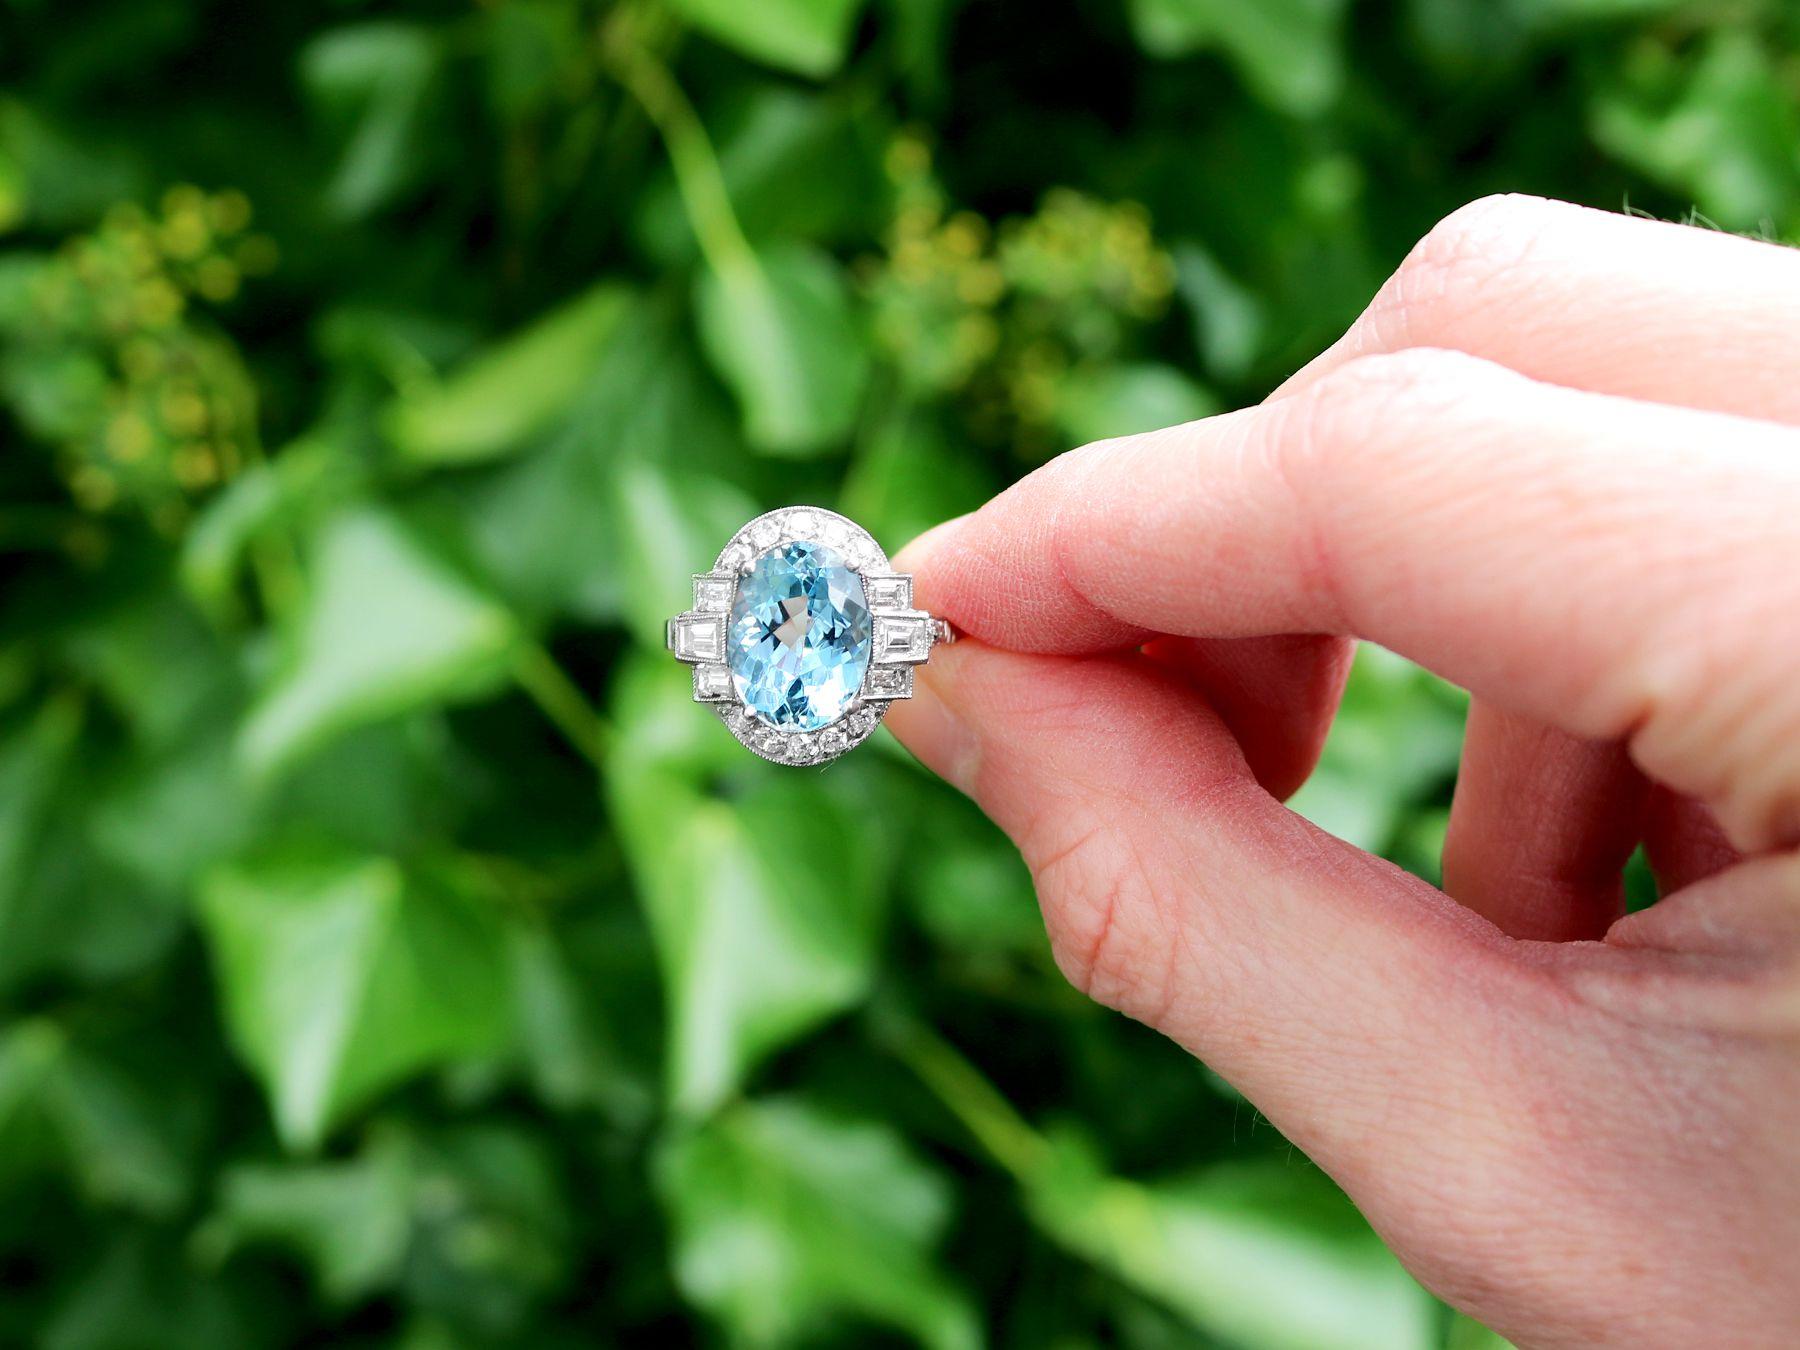 A stunning, fine and impressive 3.68 carat aquamarine and 0.90 carat diamond, platinum dress ring; part of our diverse gemstone jewelry and estate jewelry collections

This stunning, fine and impressive aquamarine ring has been crafted in